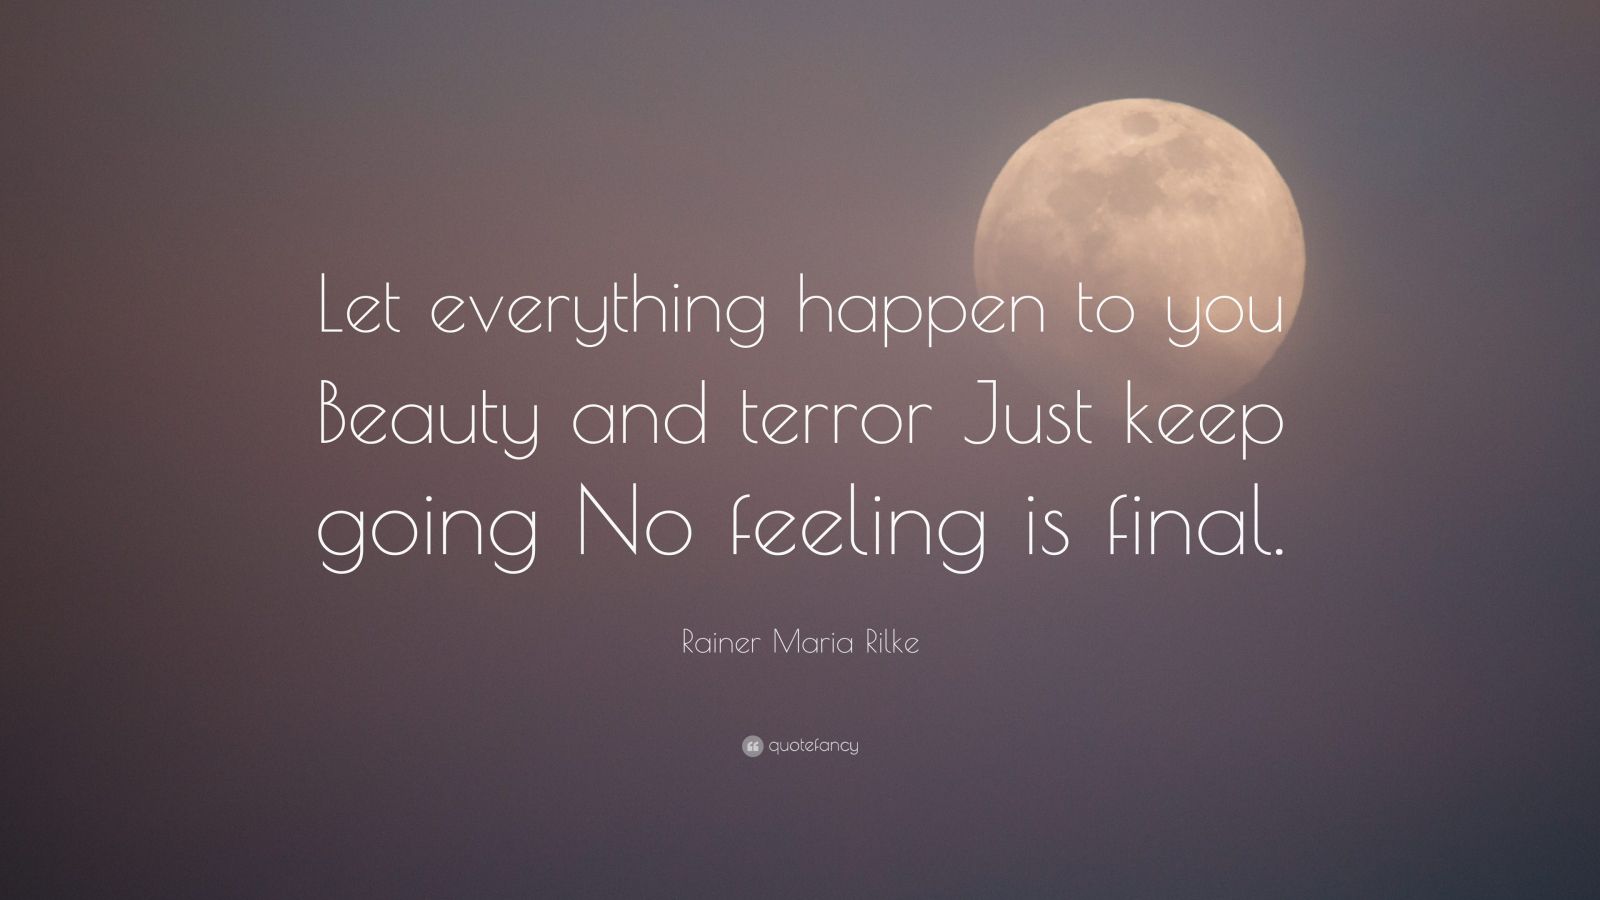 Rainer Maria Rilke Quote: “Let everything happen to you Beauty and ...